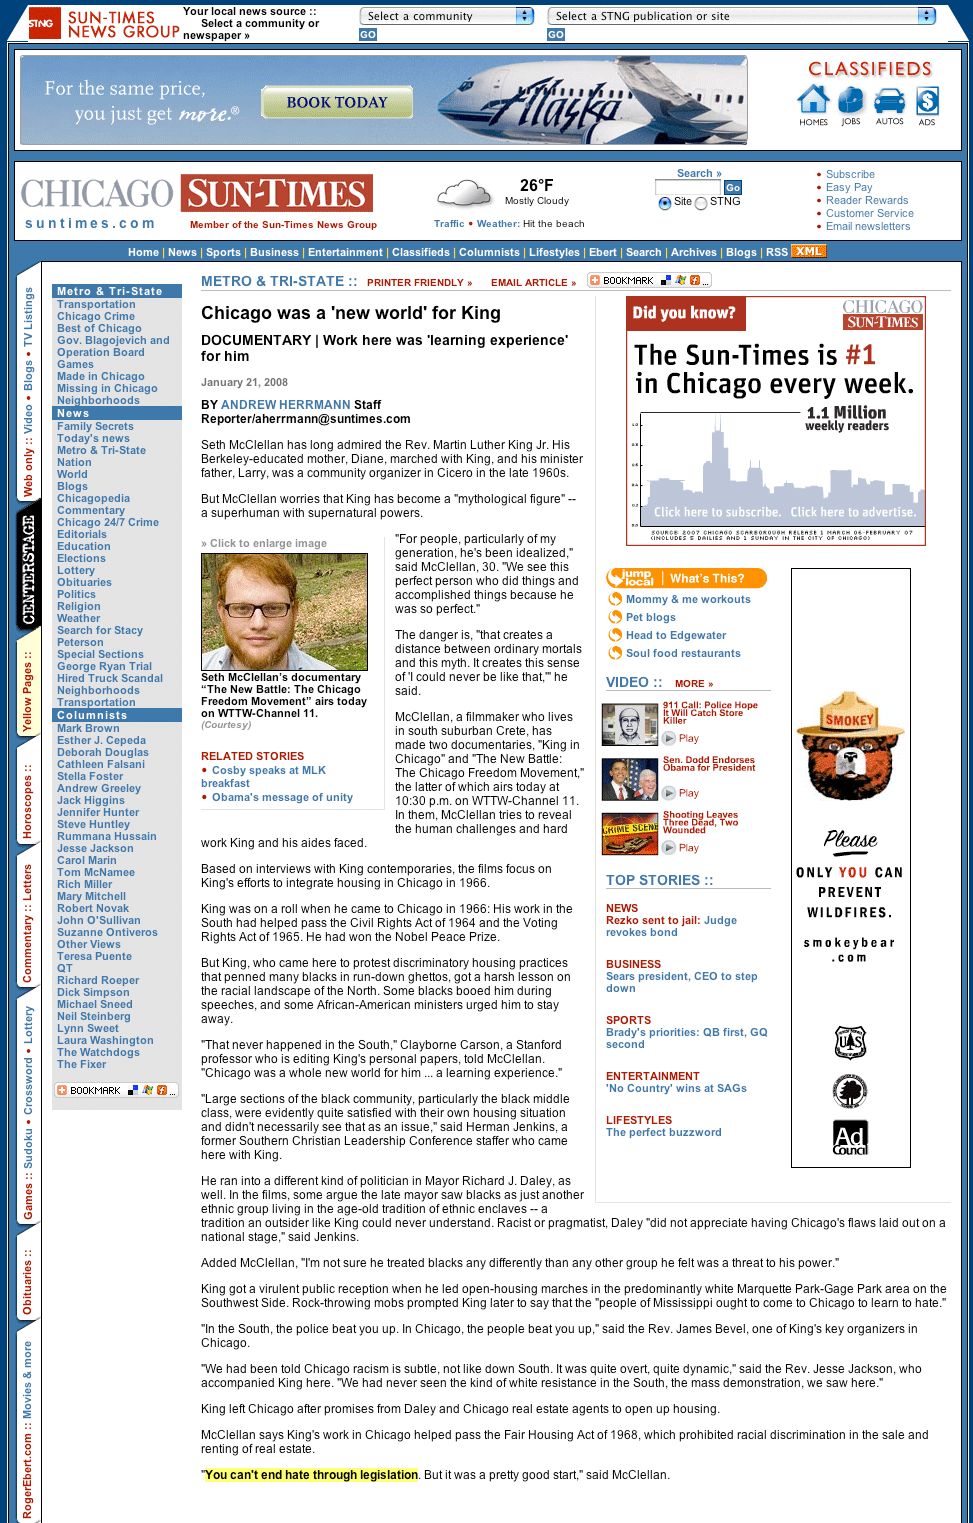 Chicago Sun-times article  January 21, 2008